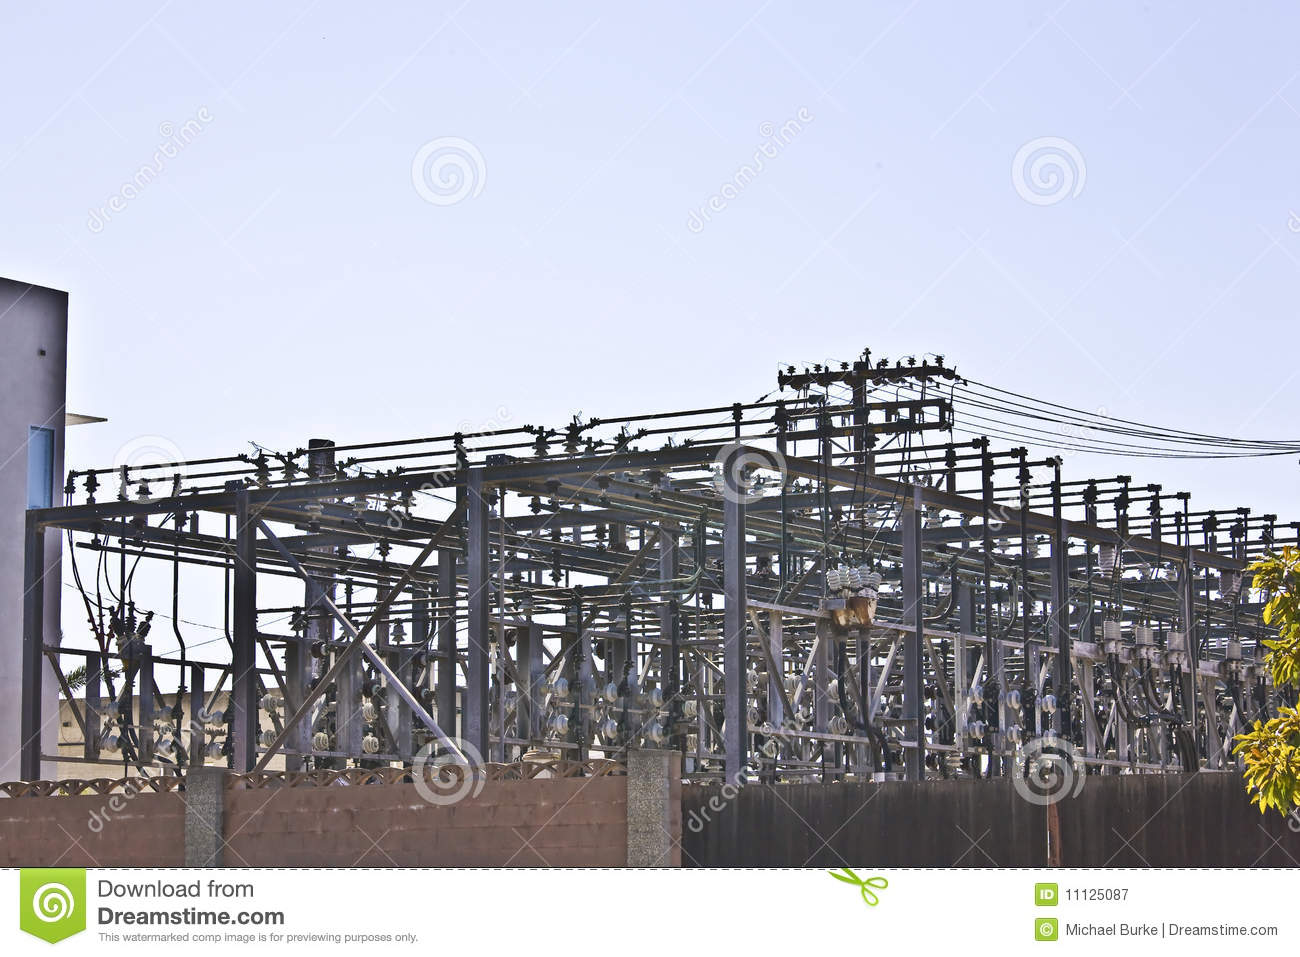 High Voltage Power Distribution Center Royalty Free Stock Photography